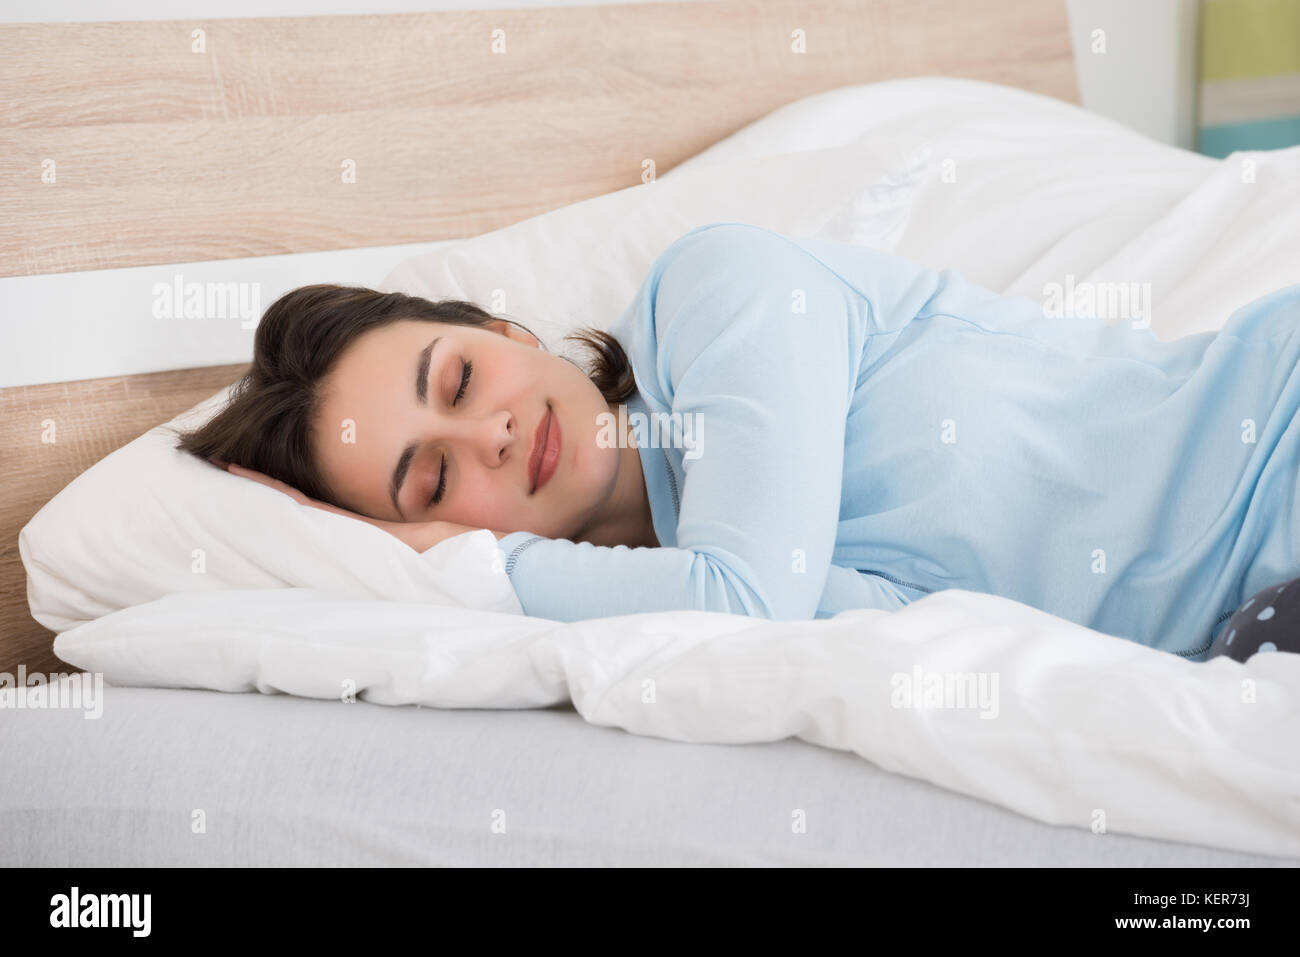 Photo Of Young Woman Sleeping On Bed Stock Photo